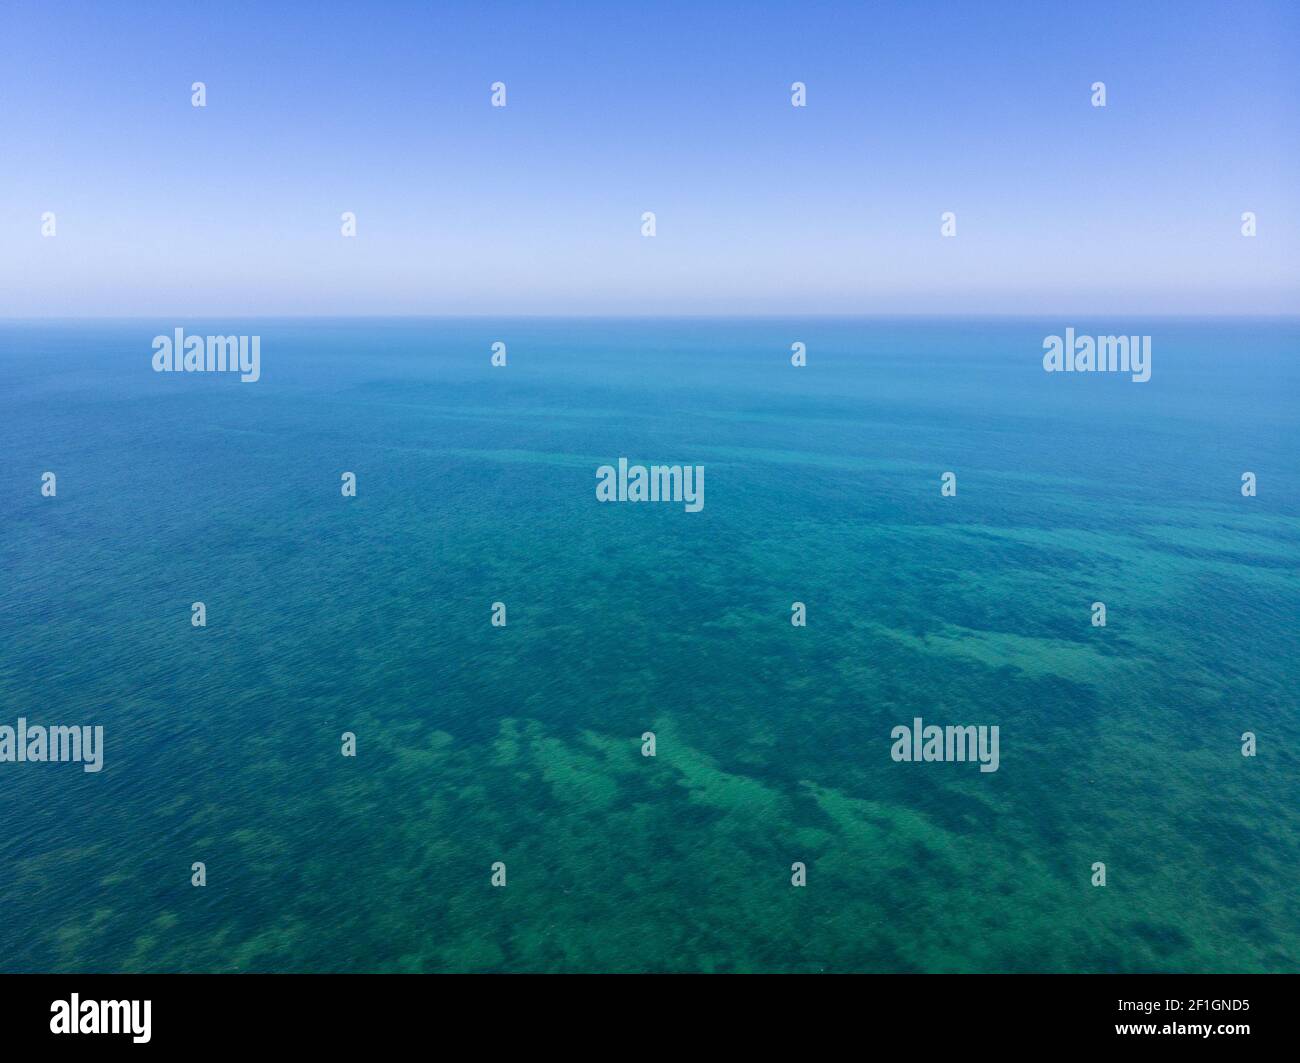 Aerial Images Of The Caribbean Ocean Stock Photo